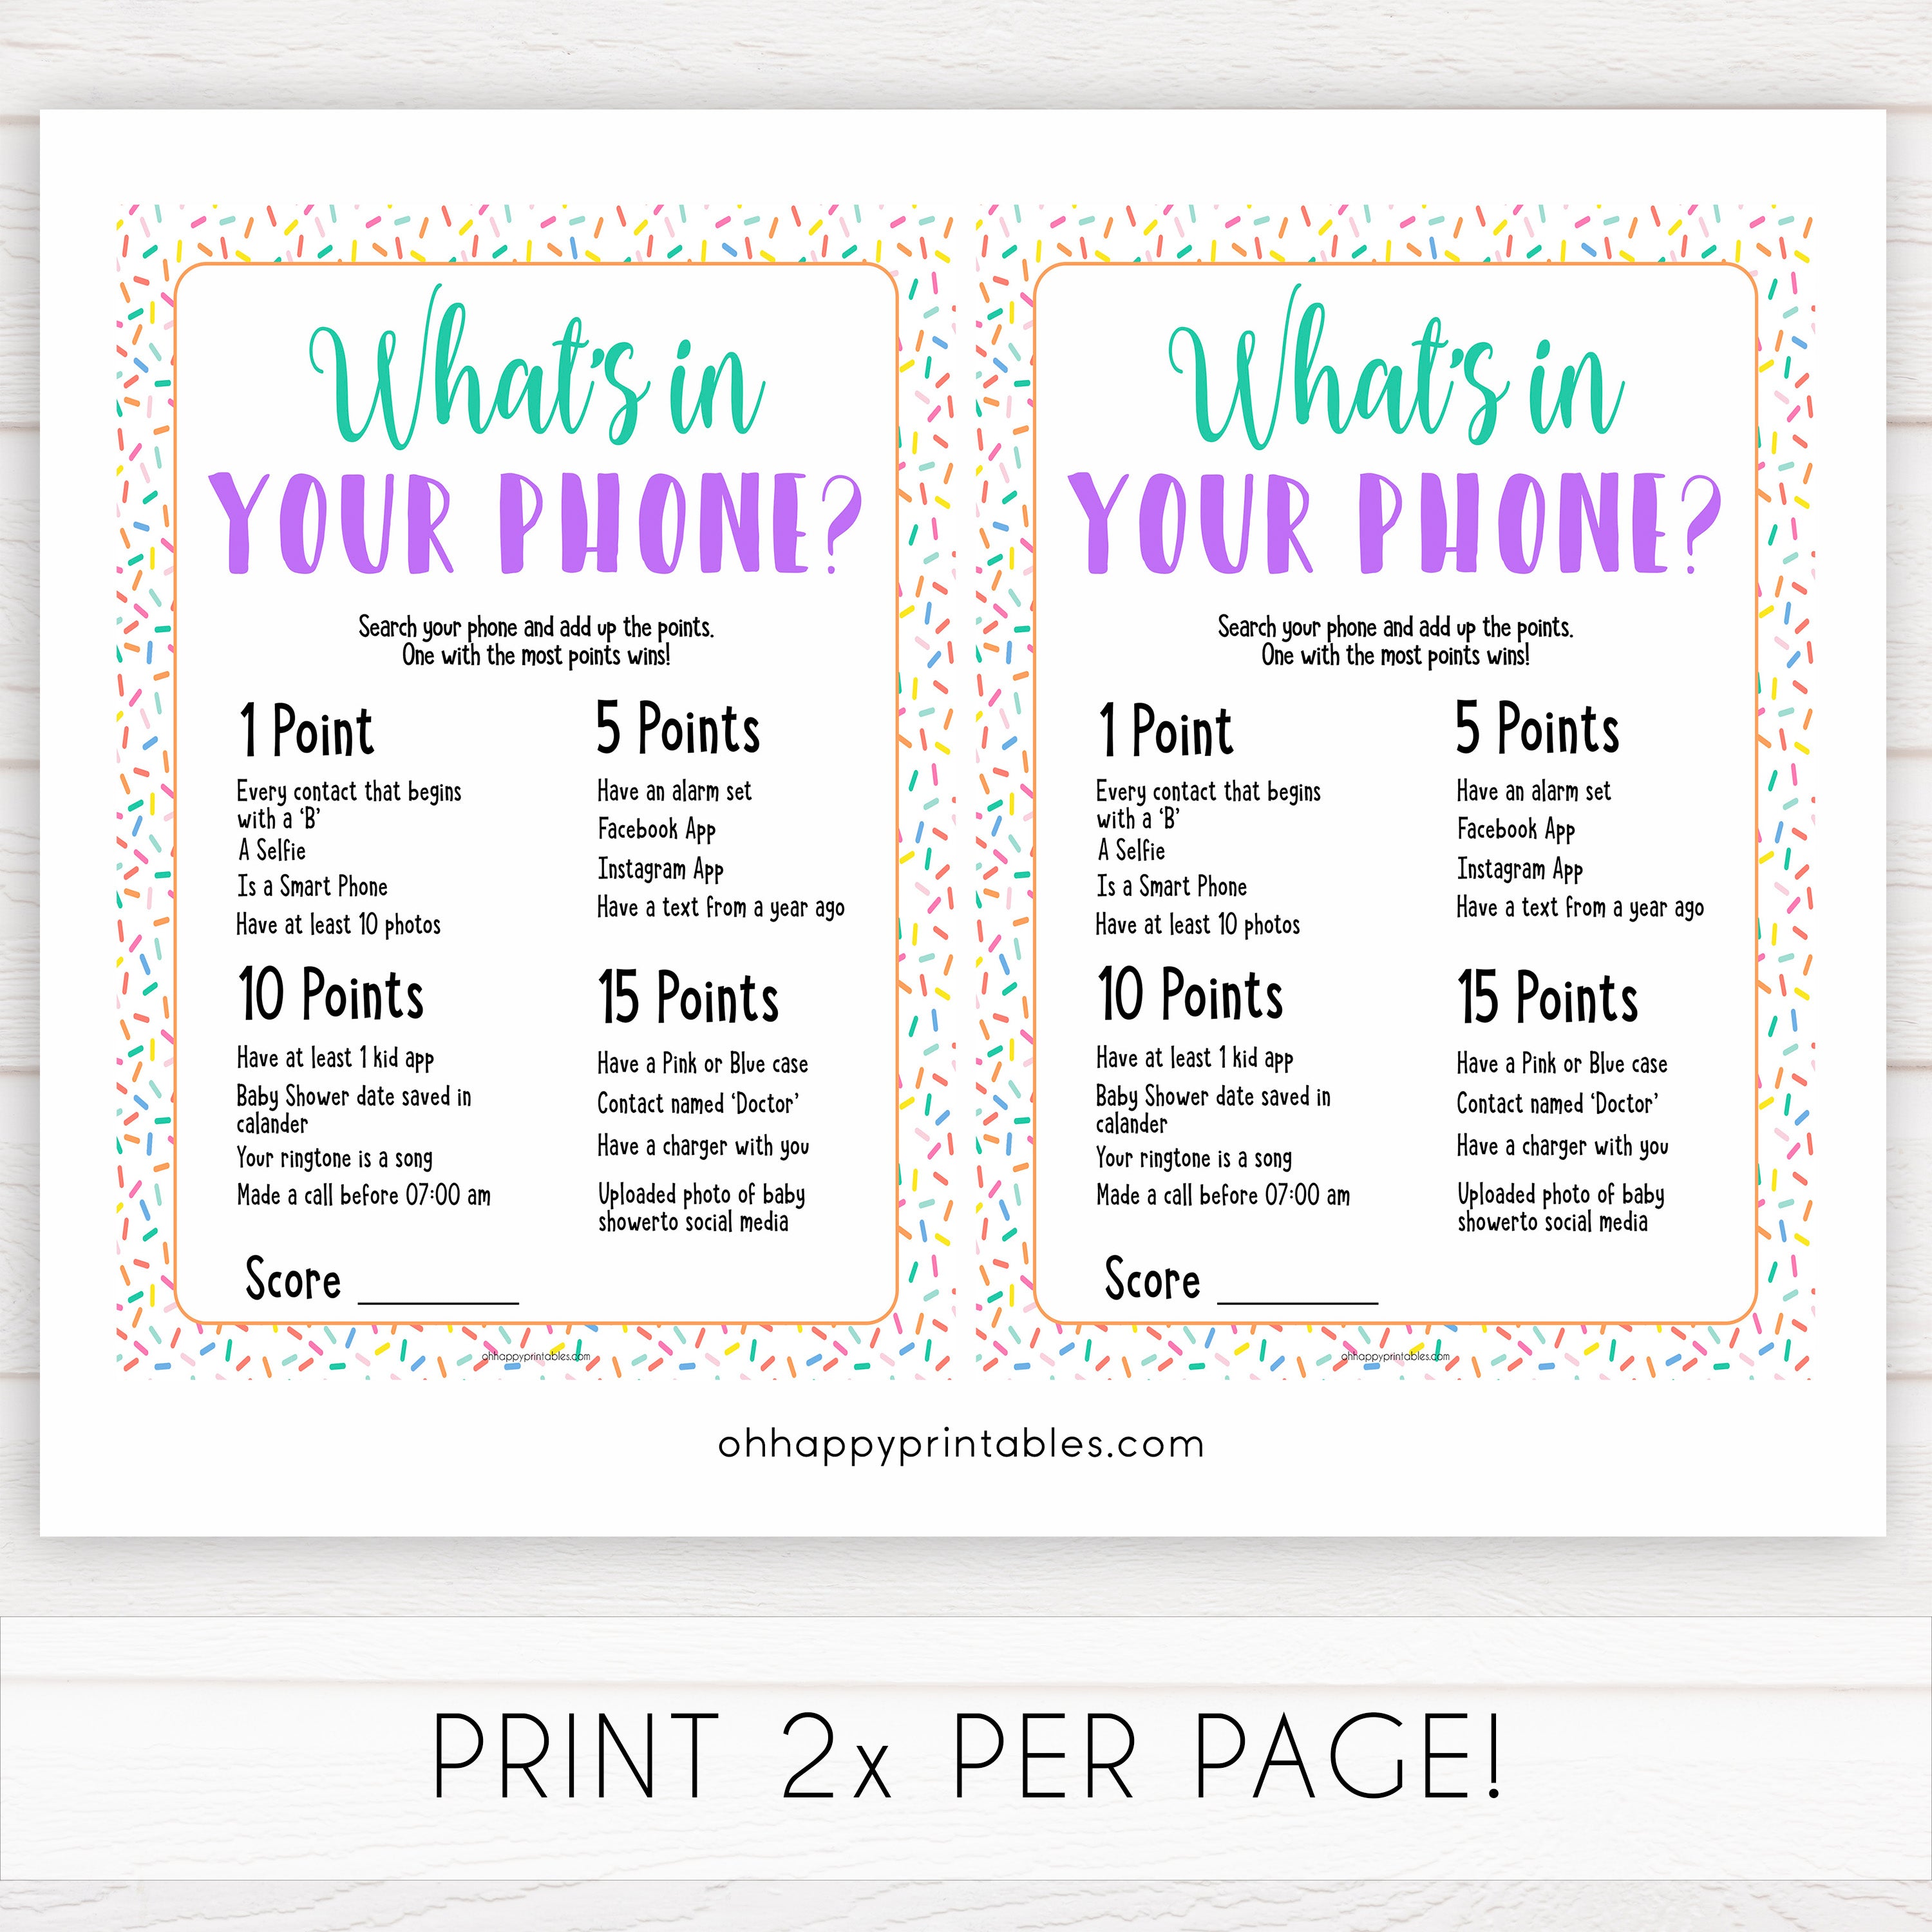 whats in your phone game, Printable baby shower games, baby sprinkle fun baby games, baby shower games, fun baby shower ideas, top baby shower ideas, sprinkle shower baby shower, friends baby shower ideas